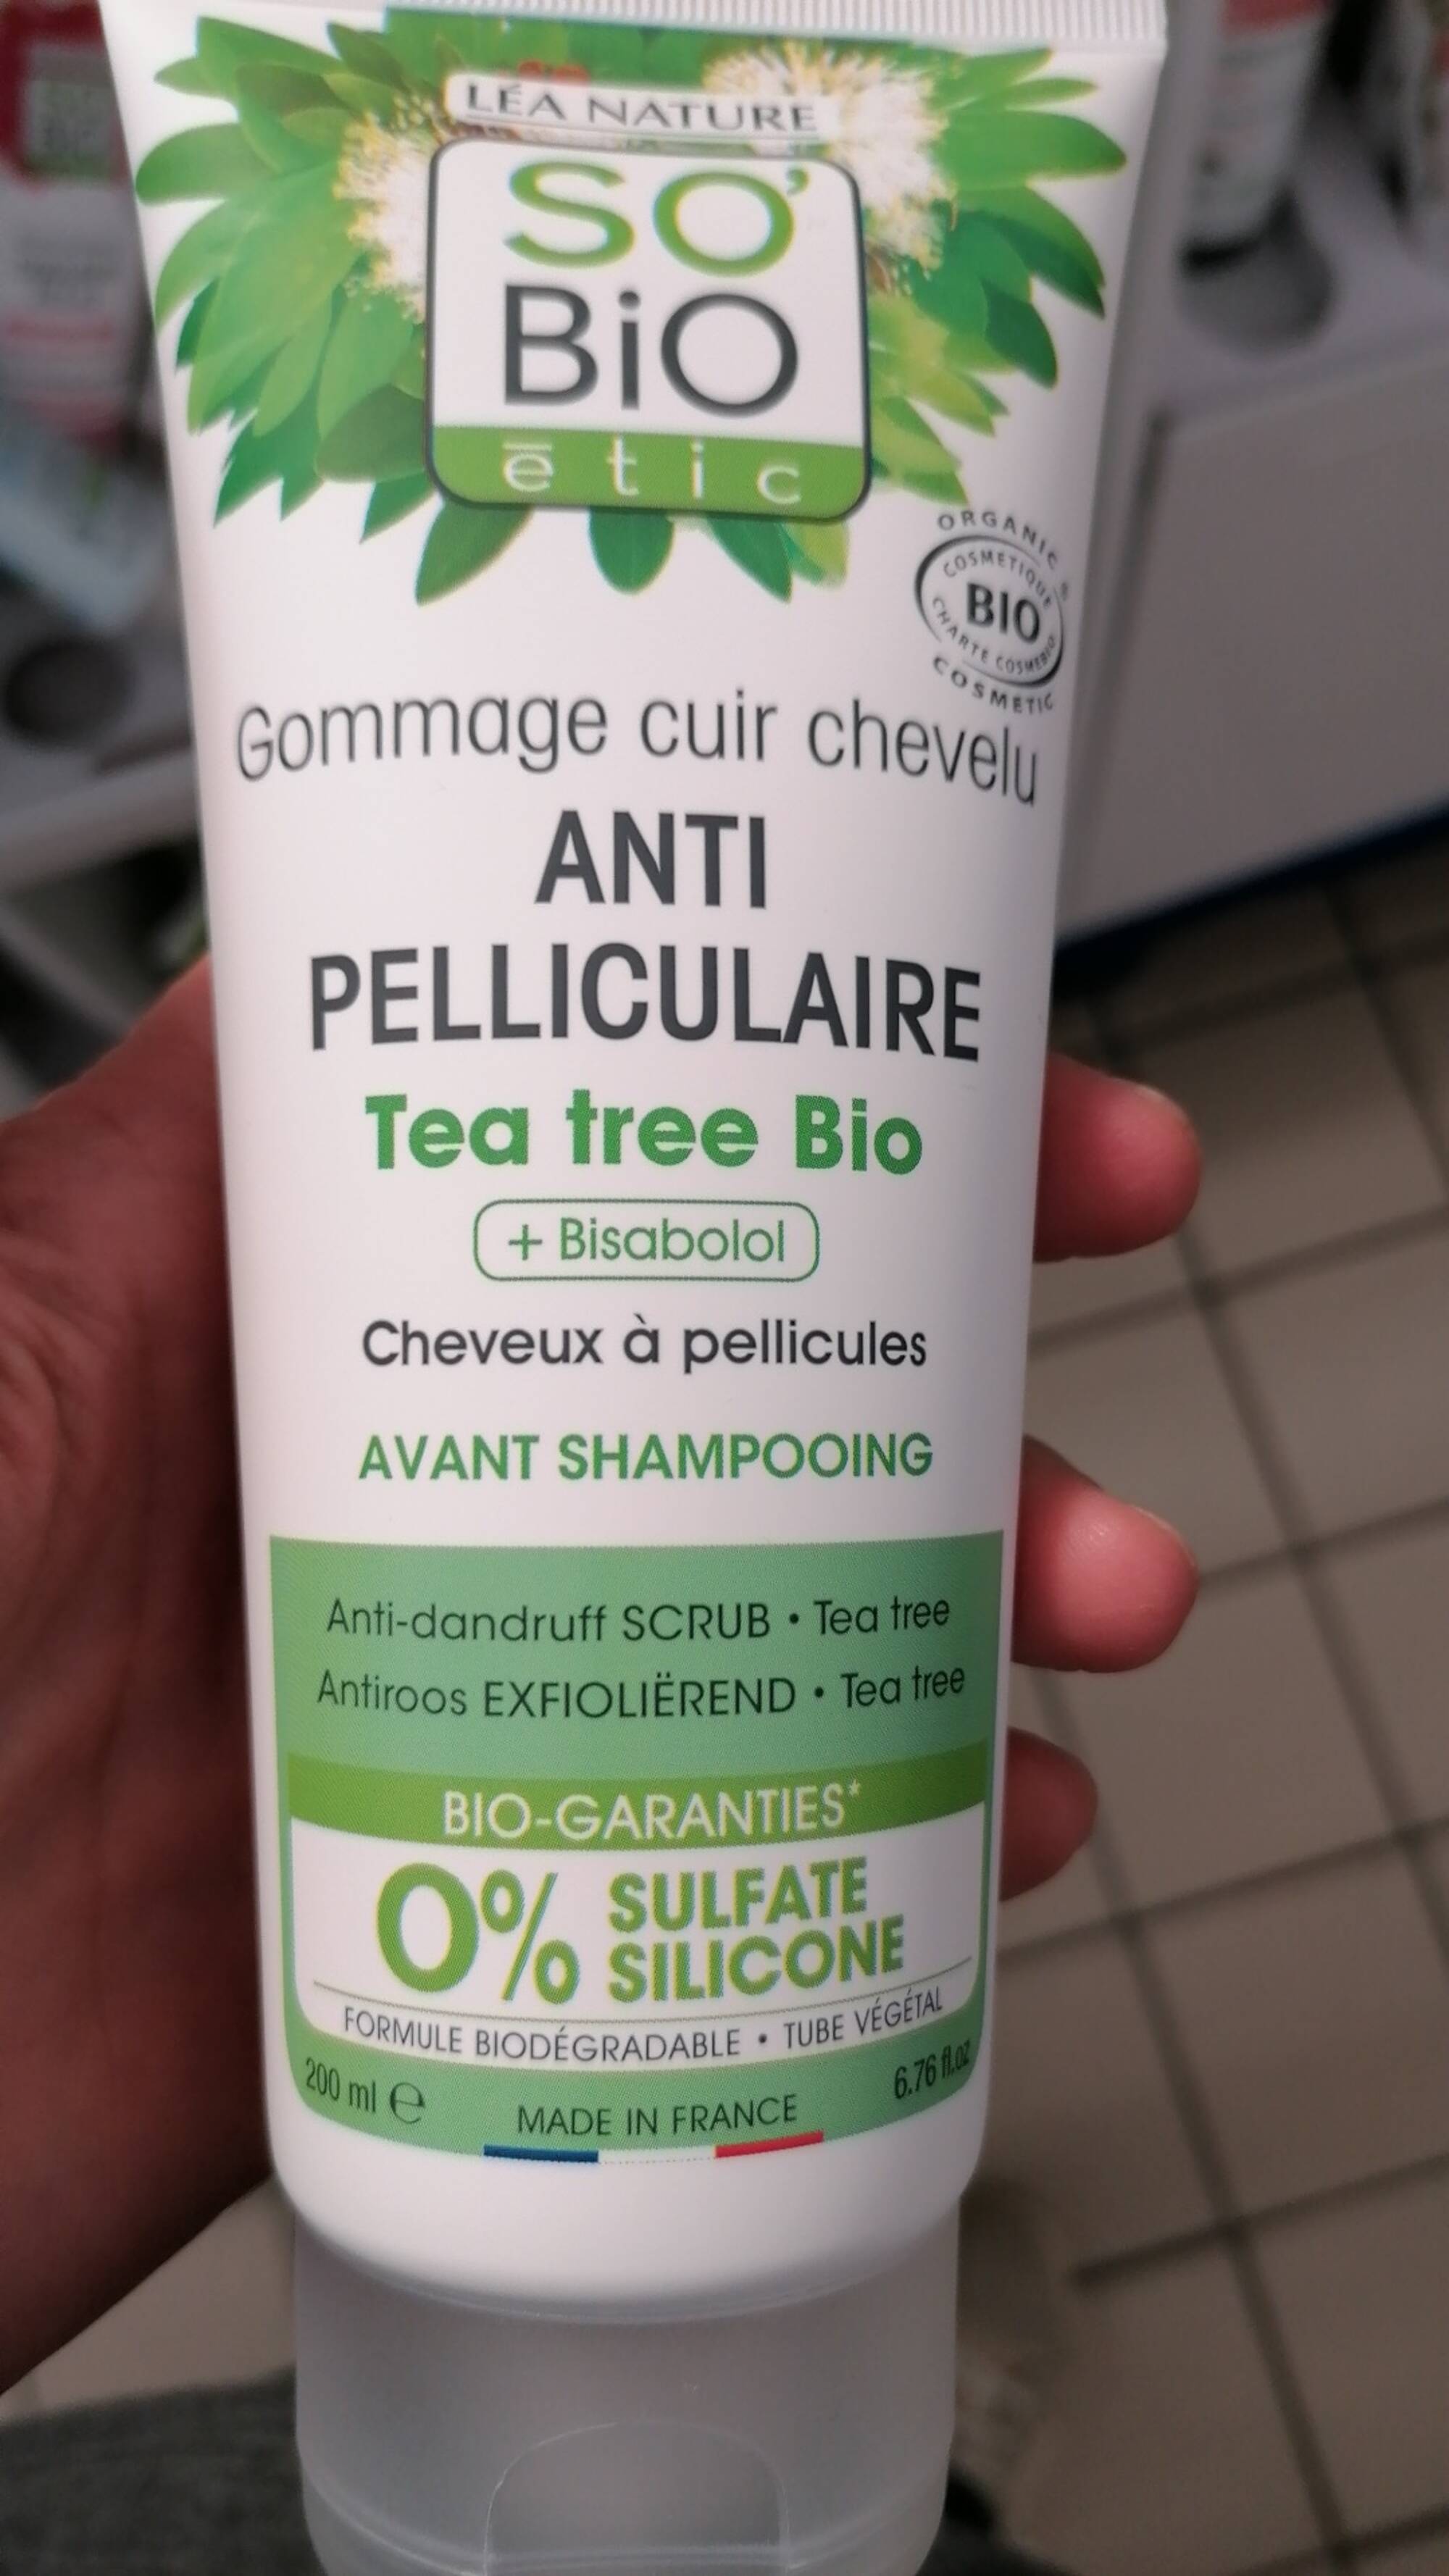 SO'BIO ÉTIC - Gommage cuir chevelu anti-pelliculaire